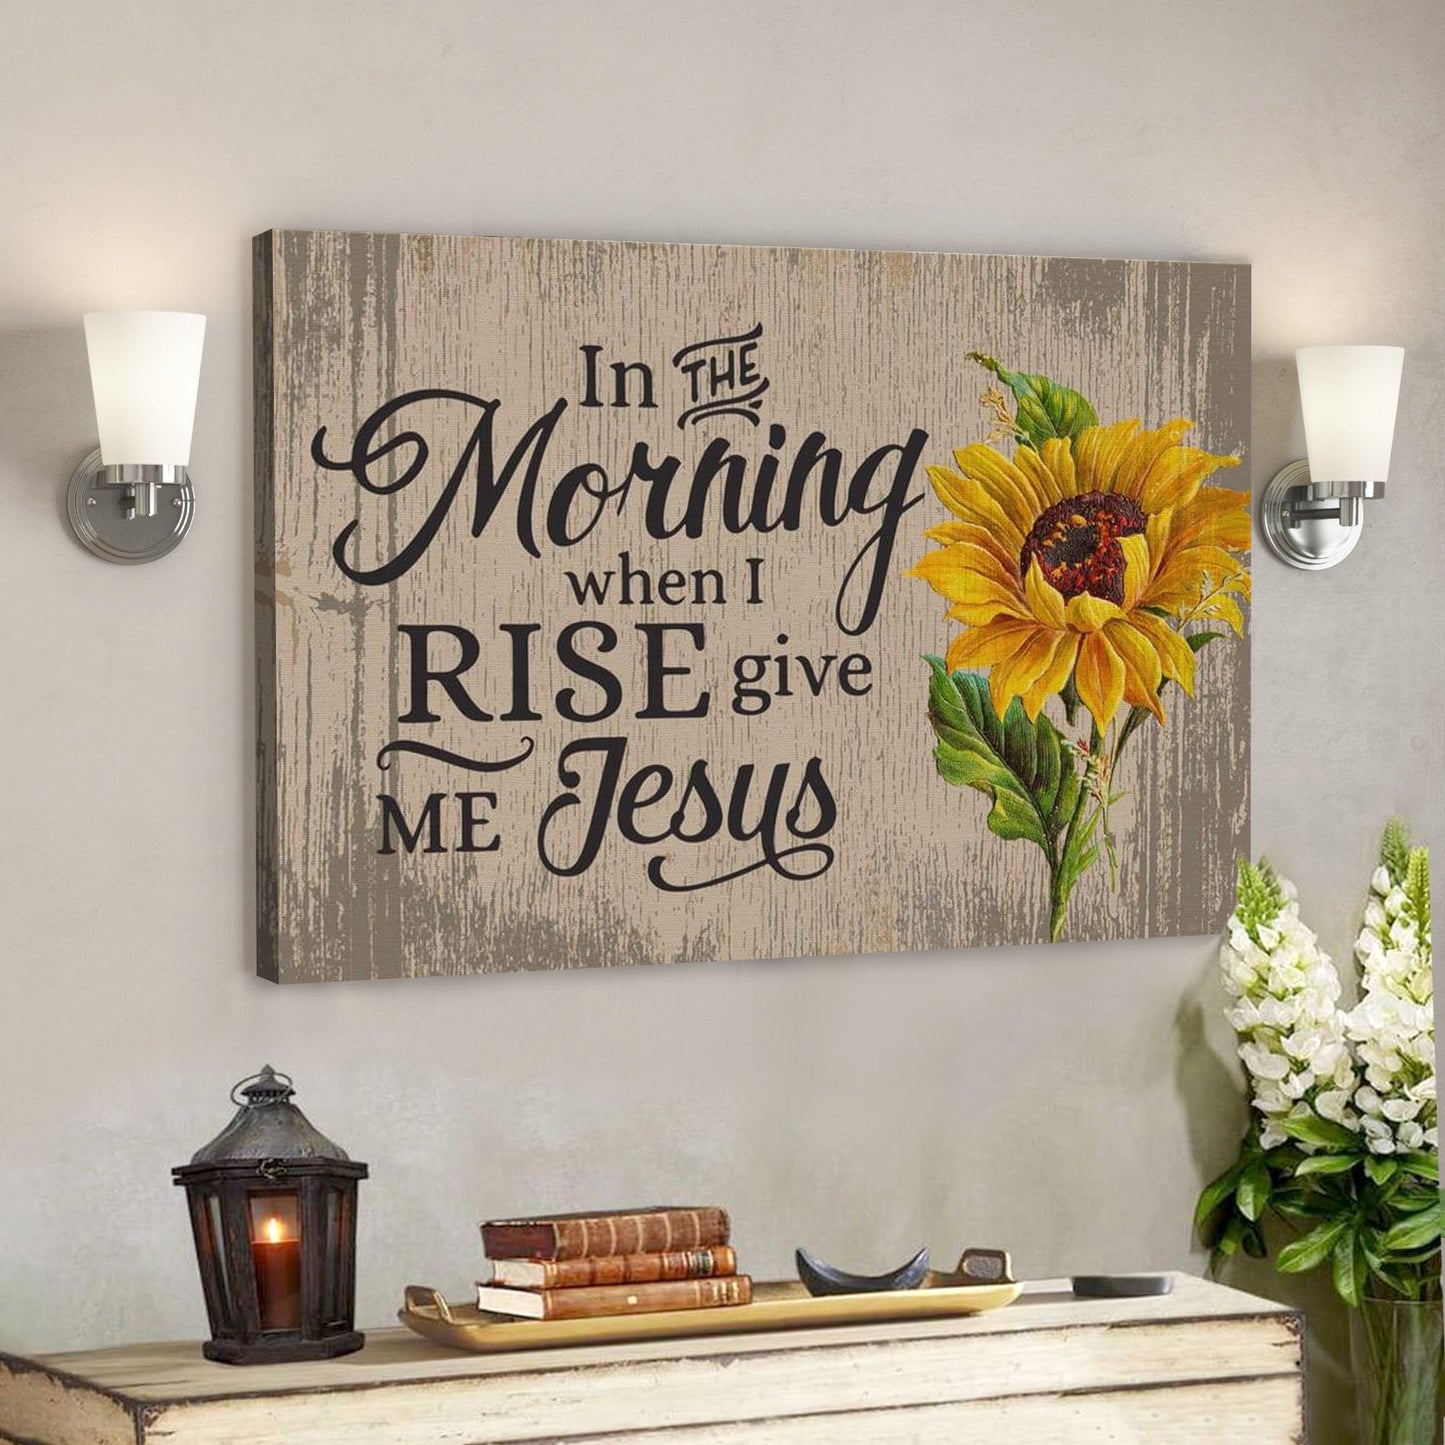 God Canvas Prints - Jesus Canvas Art - In The Morning When I Rise Give Me Jesus Canvas Print - Christian Wall Art - Ciaocustom